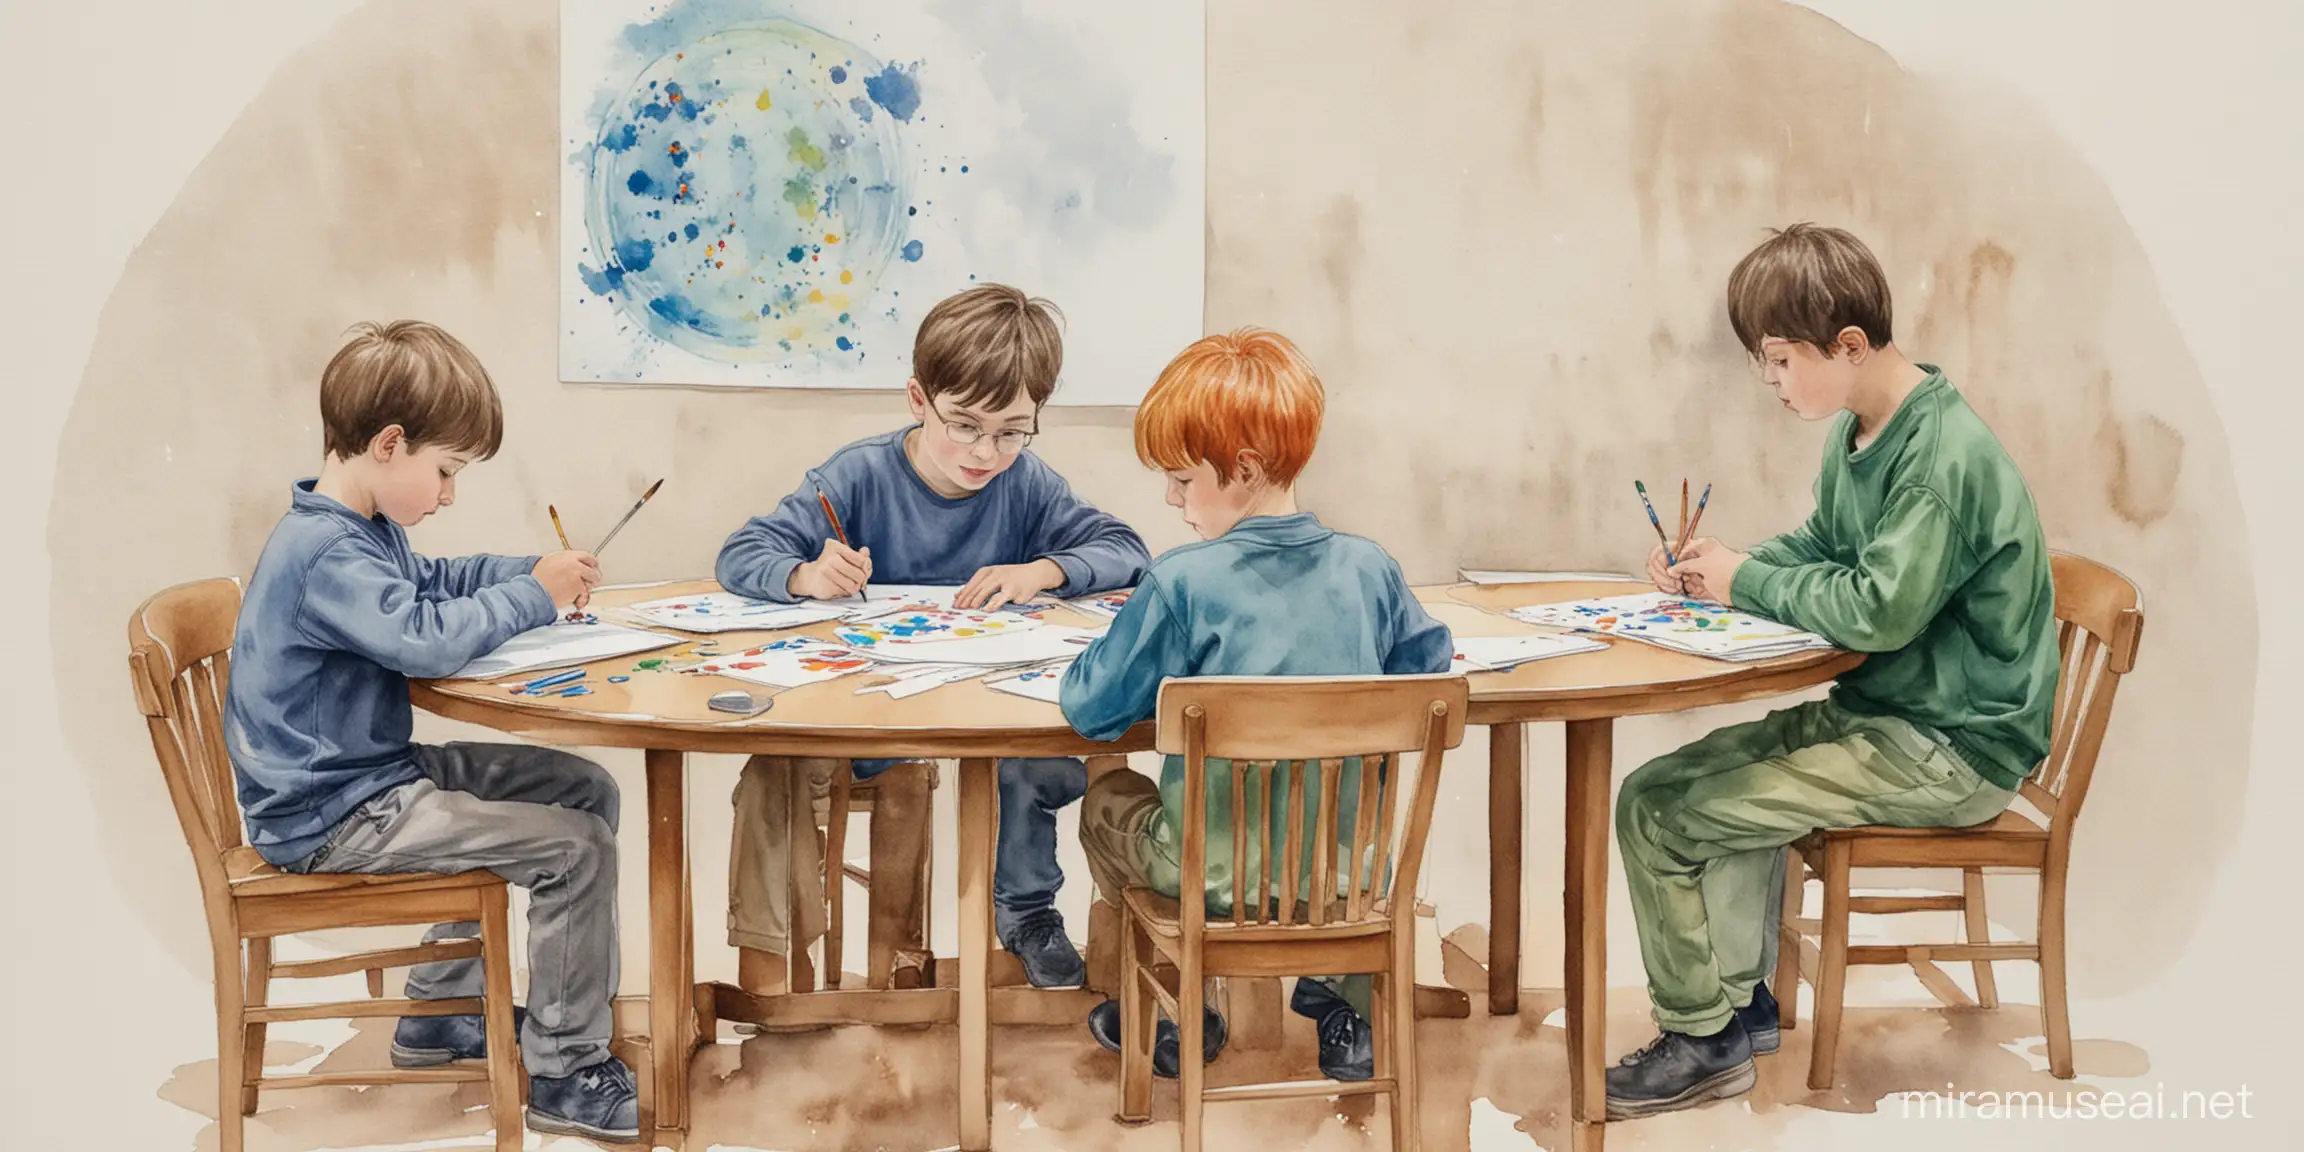 a water color image with a subject of several autistic boys that are drawing and painting at round a round desk